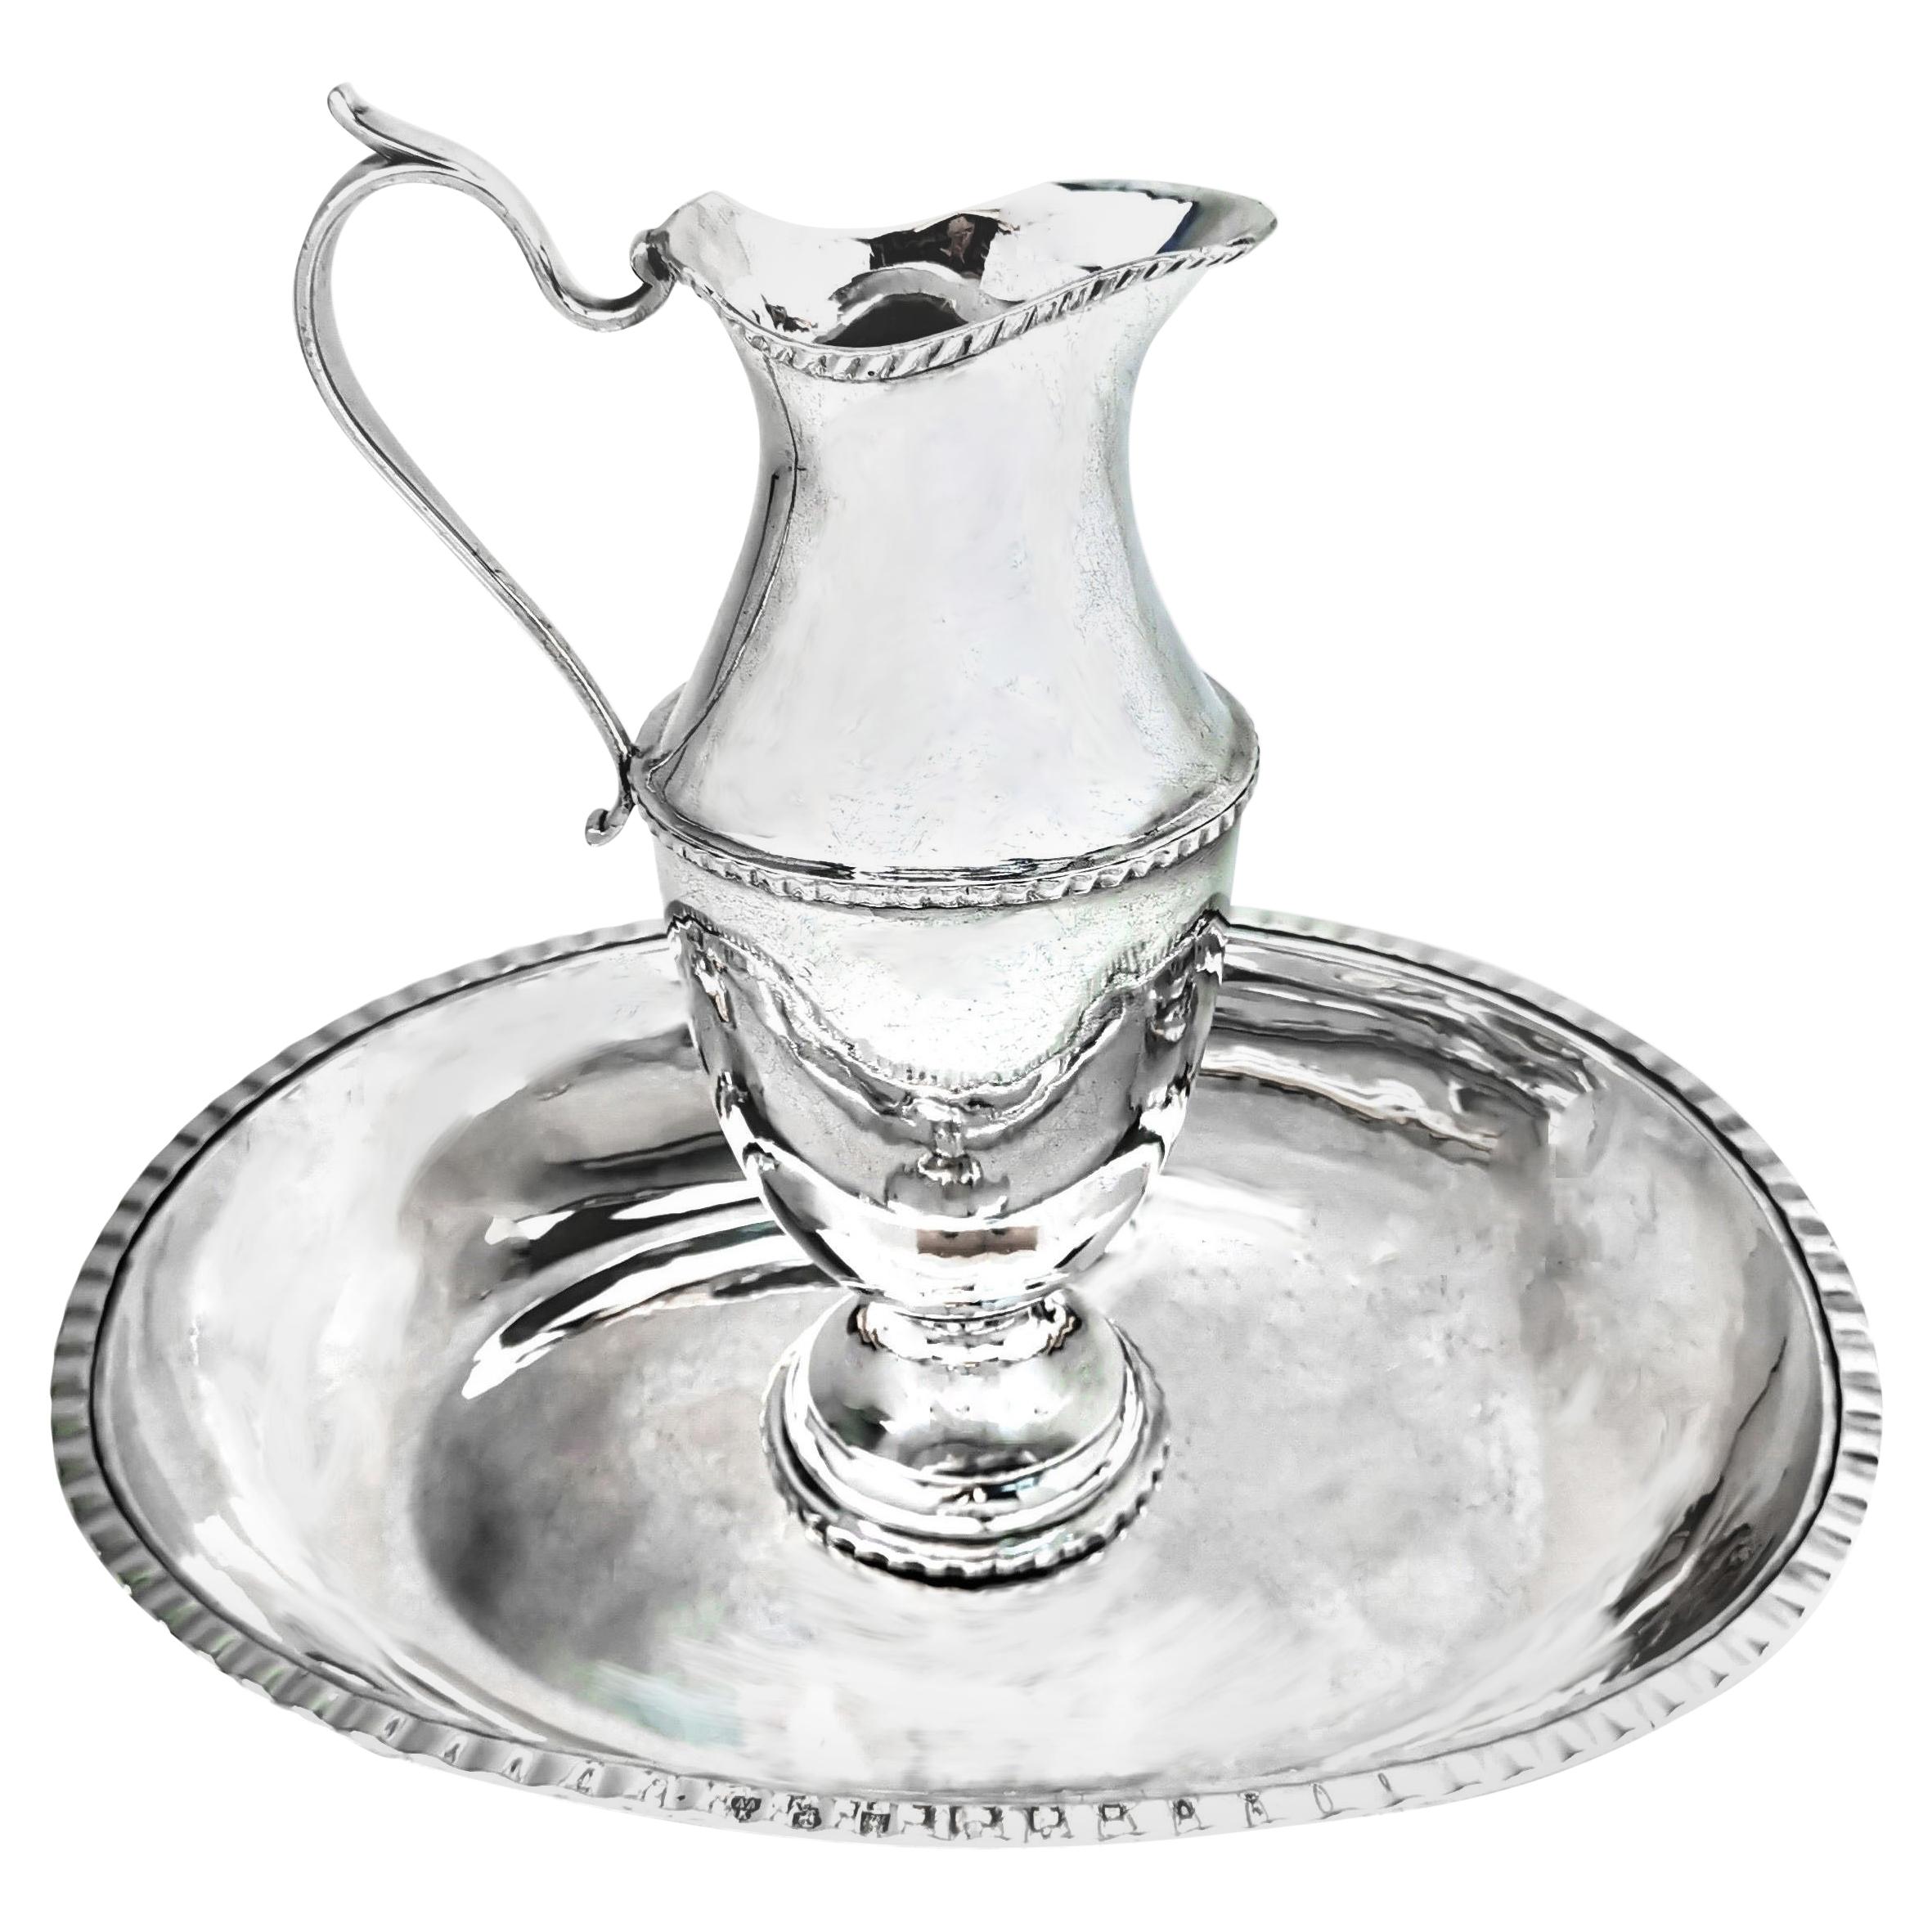 Rare Antique Russian Silver Ewer and Basin / Jug and Bowl, Moscow, 1786